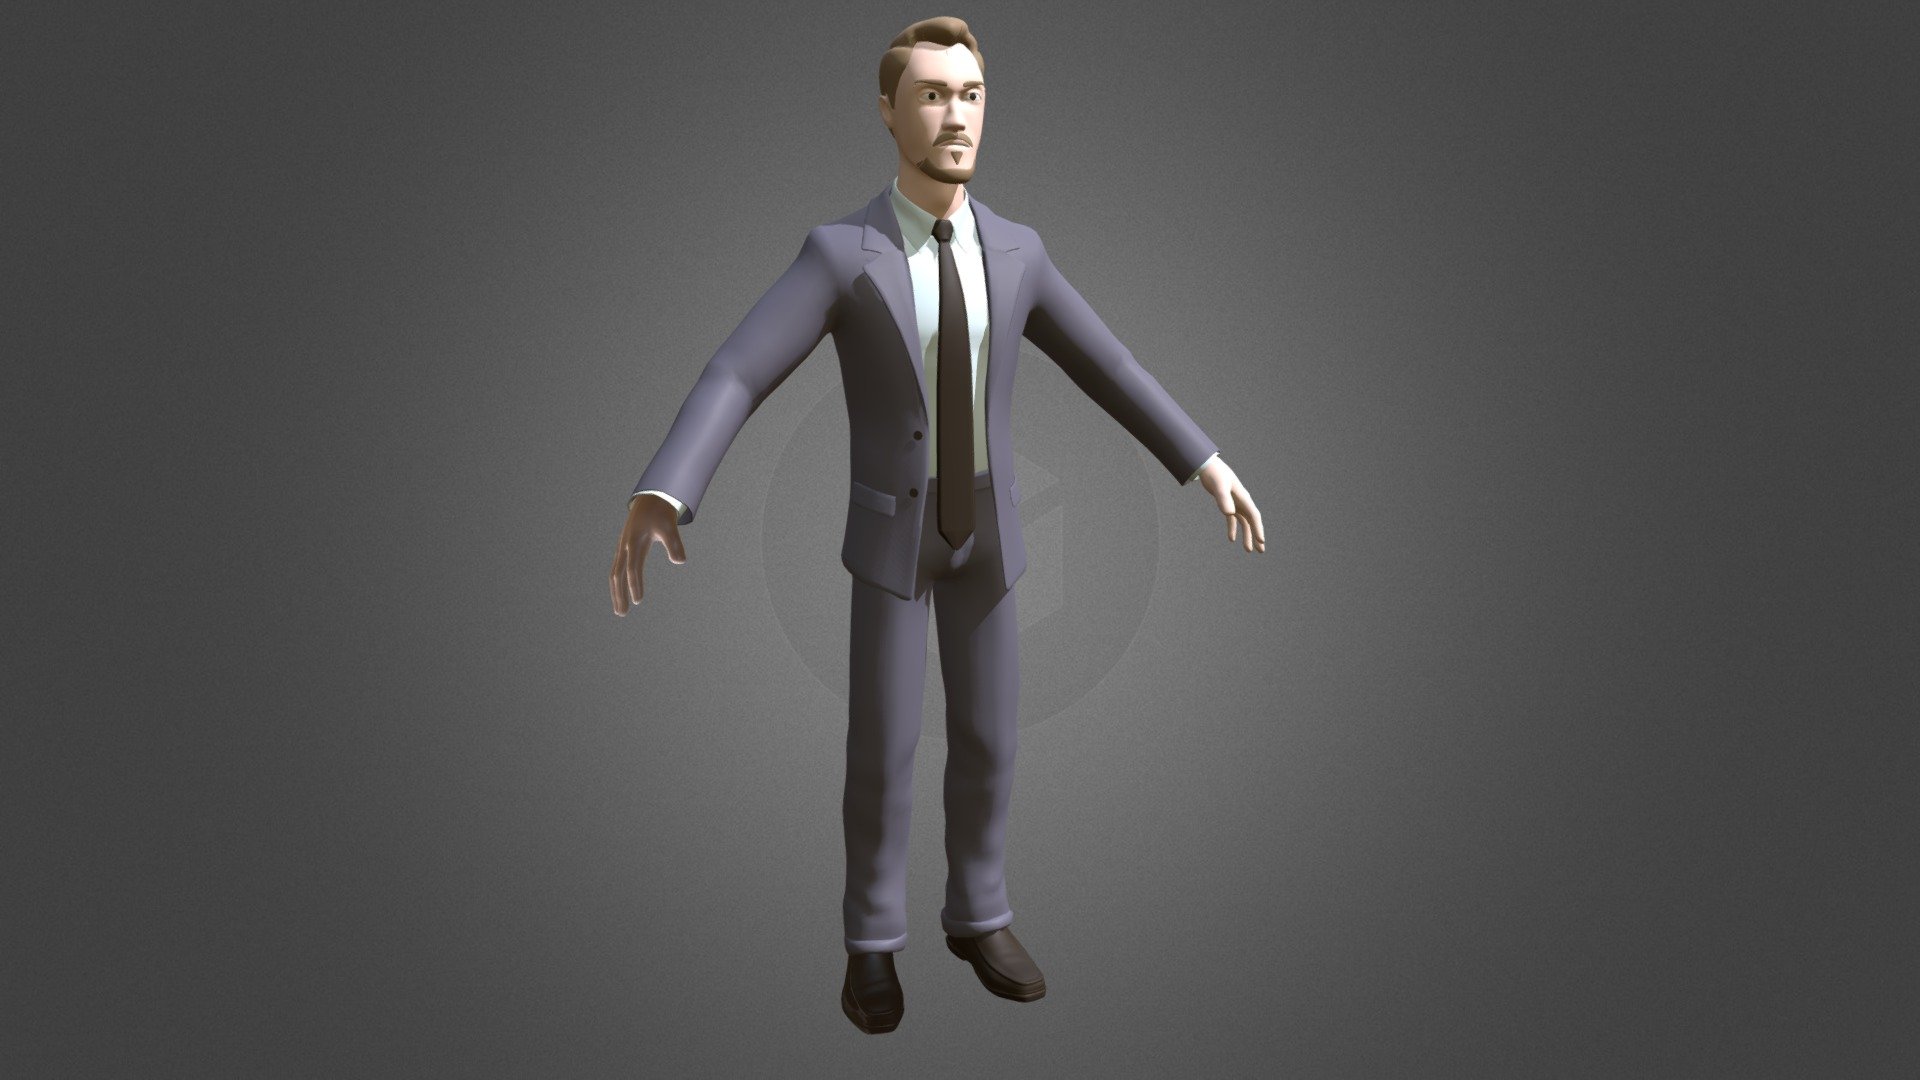 A character to fill in the background of city street scenes for the student short film we're working on. 

Hair/suit color and the inclusion of jackets/facial hair will add variety 3d model